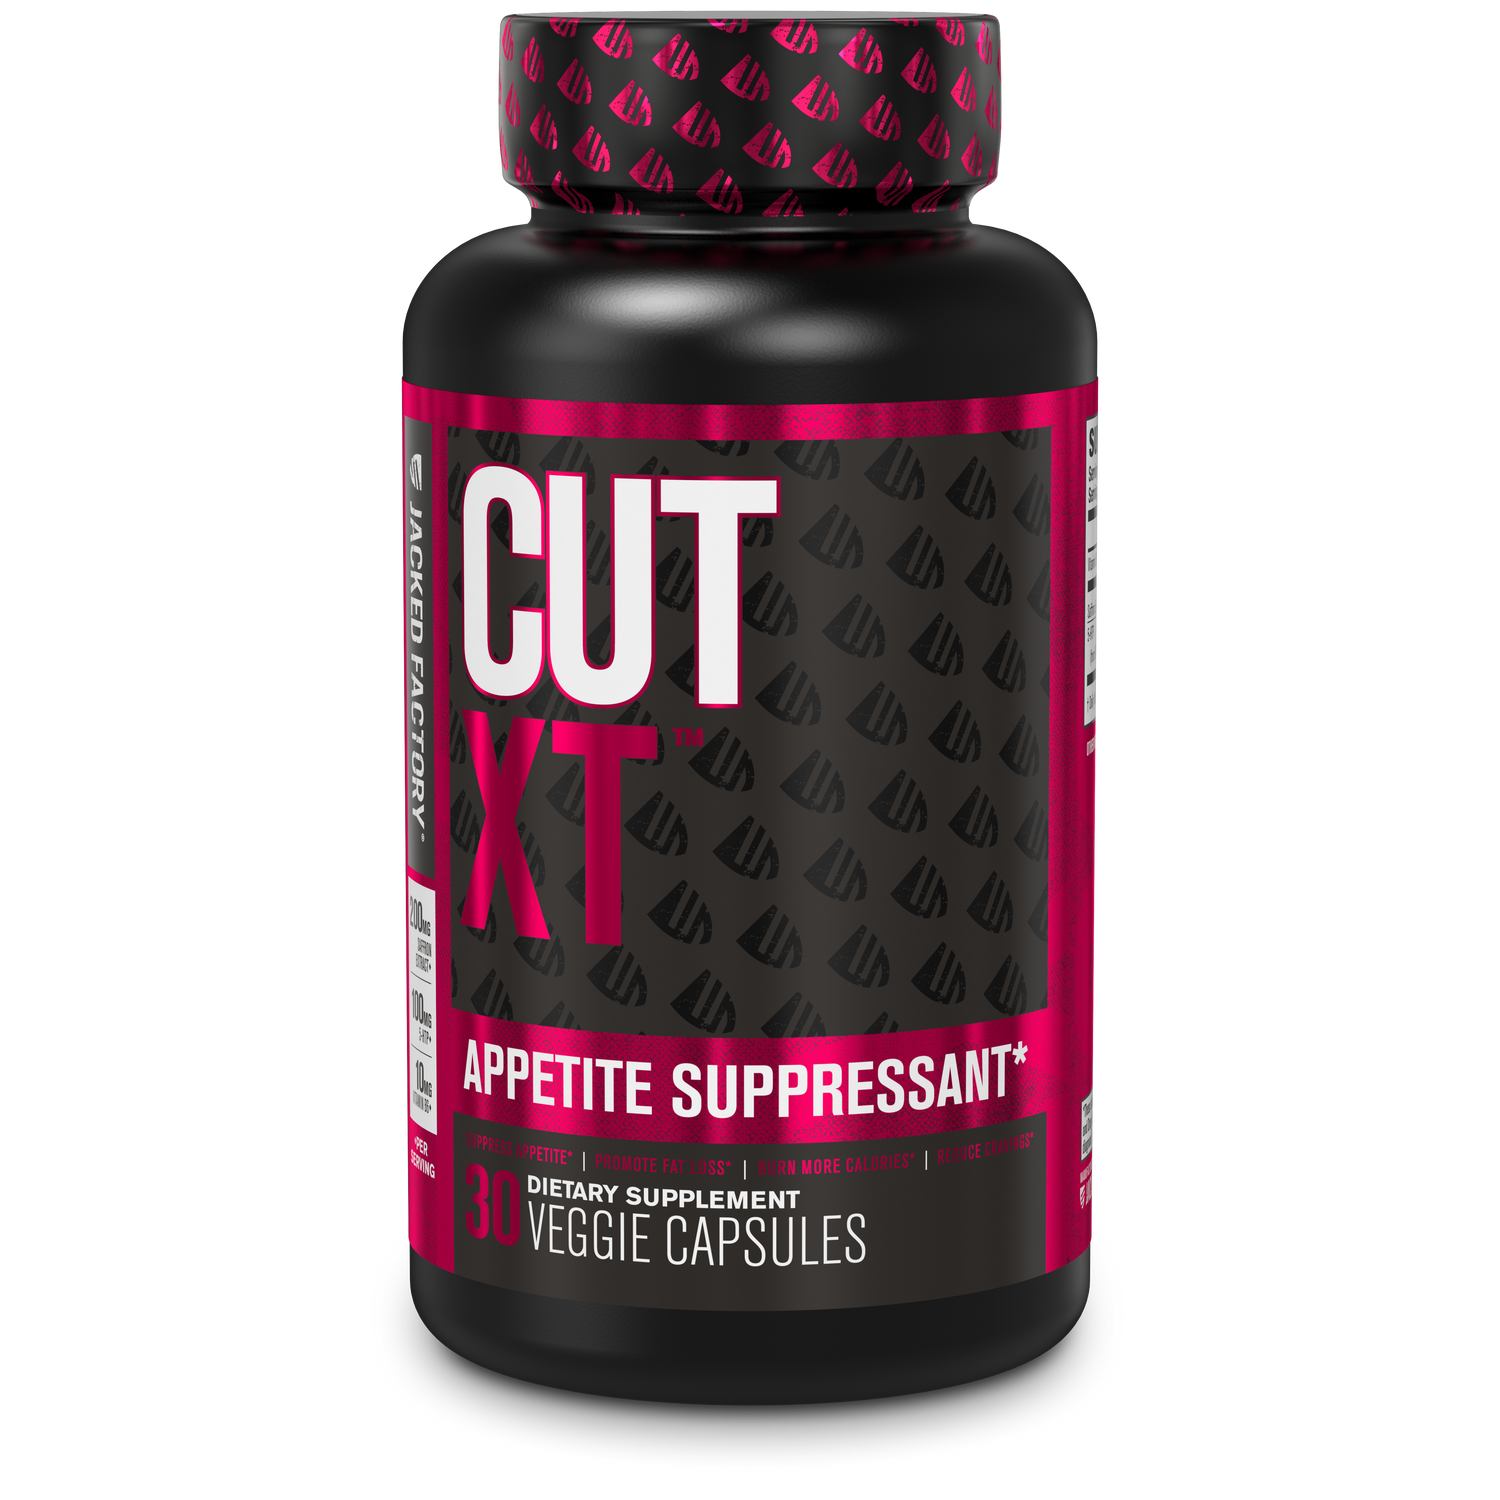 Jacked Factory's CUT-XT (30 veggie capsules) in a black bottle with pink logo